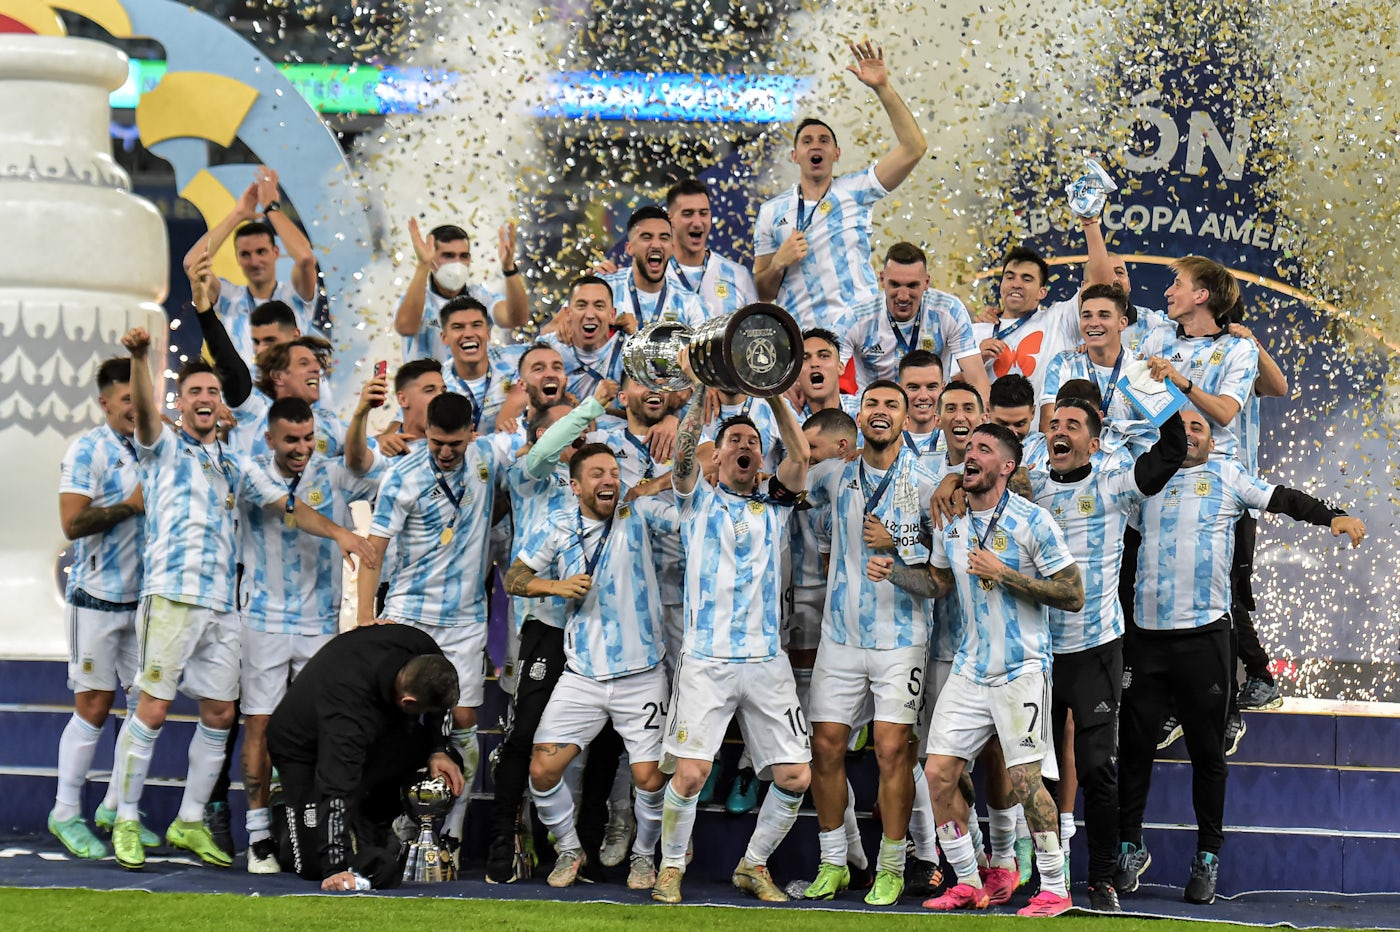 TSN and RDS Acquire Exclusive Media Rights to the CONMEBOL COPA AMERICA